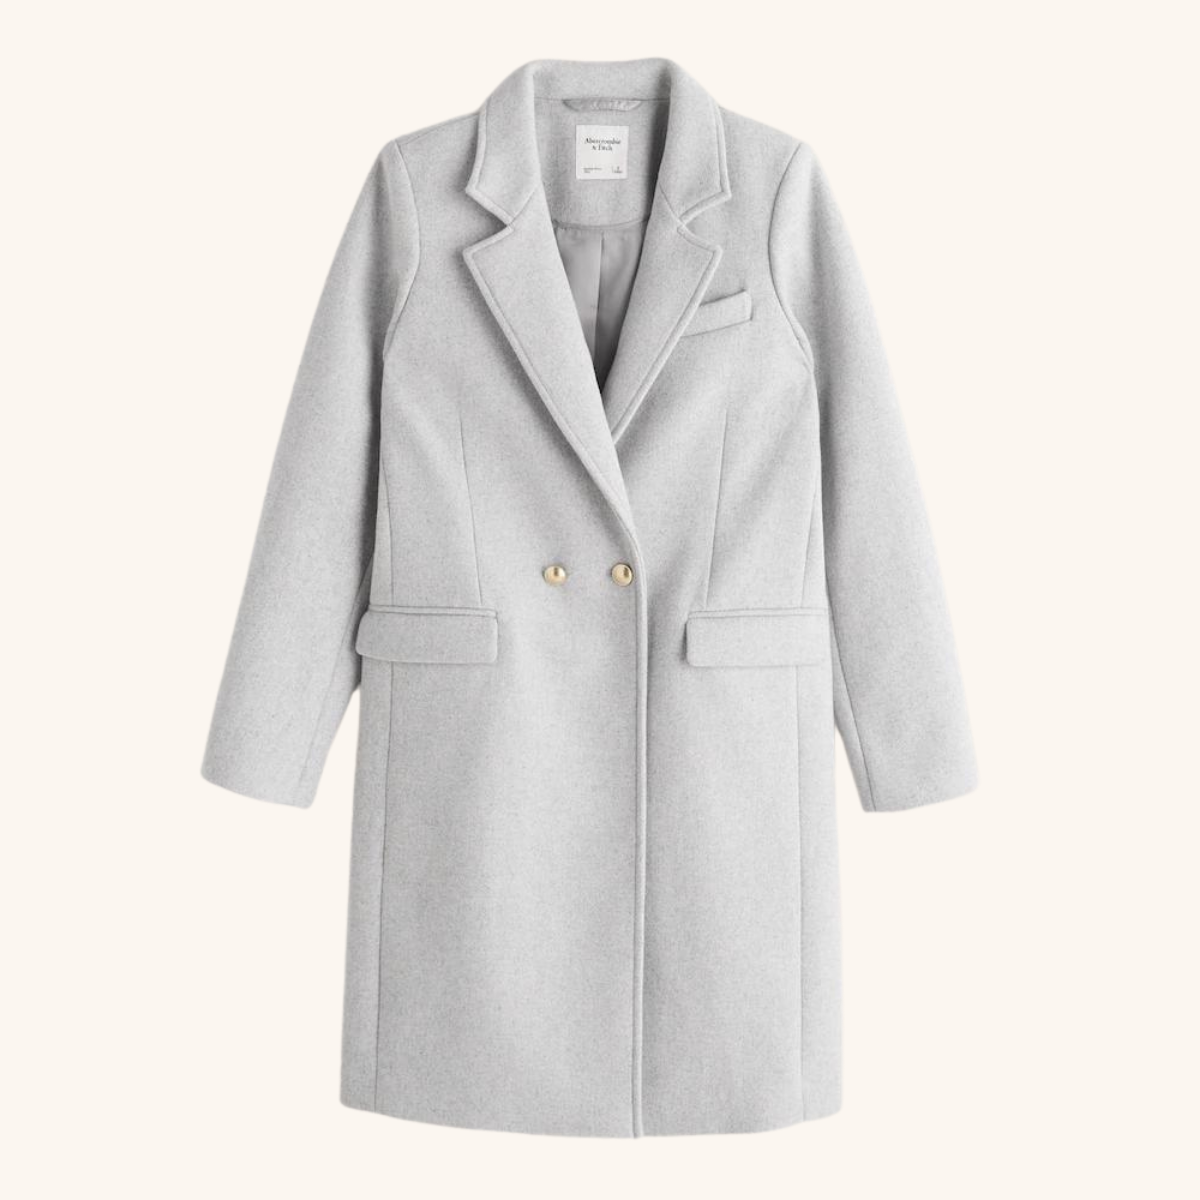   Abercrombie Double-Breasted Wool Dad Coat, $110  